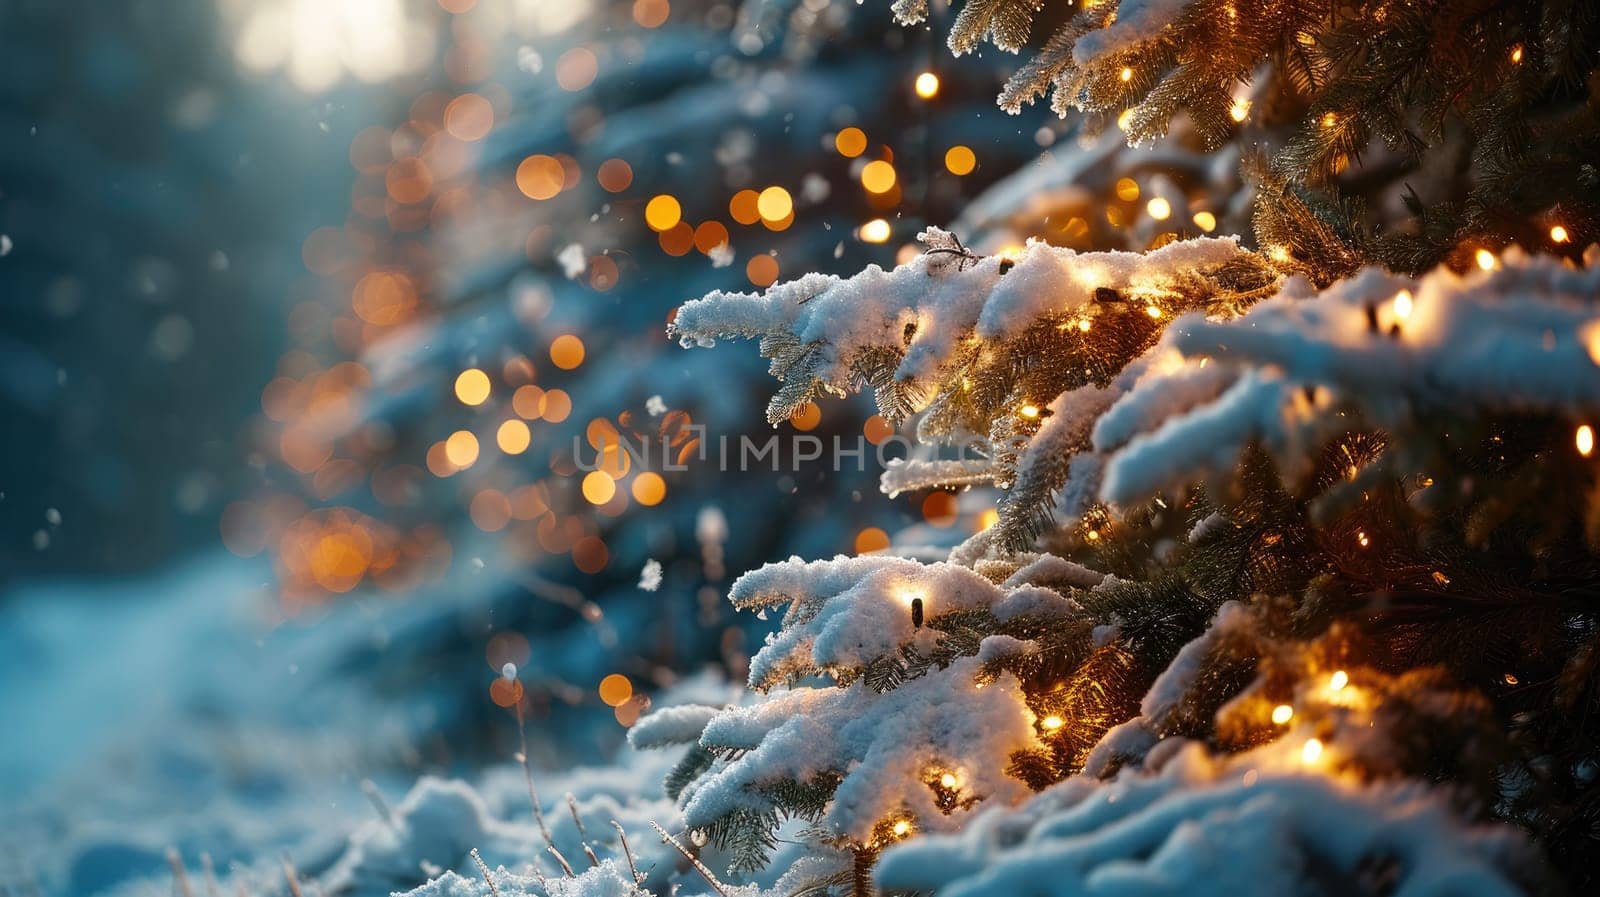 Photo of snow-covered Christmas trees with garlands, among the white snow, creating an amazing magic of the winter forest and a festive atmosphere.